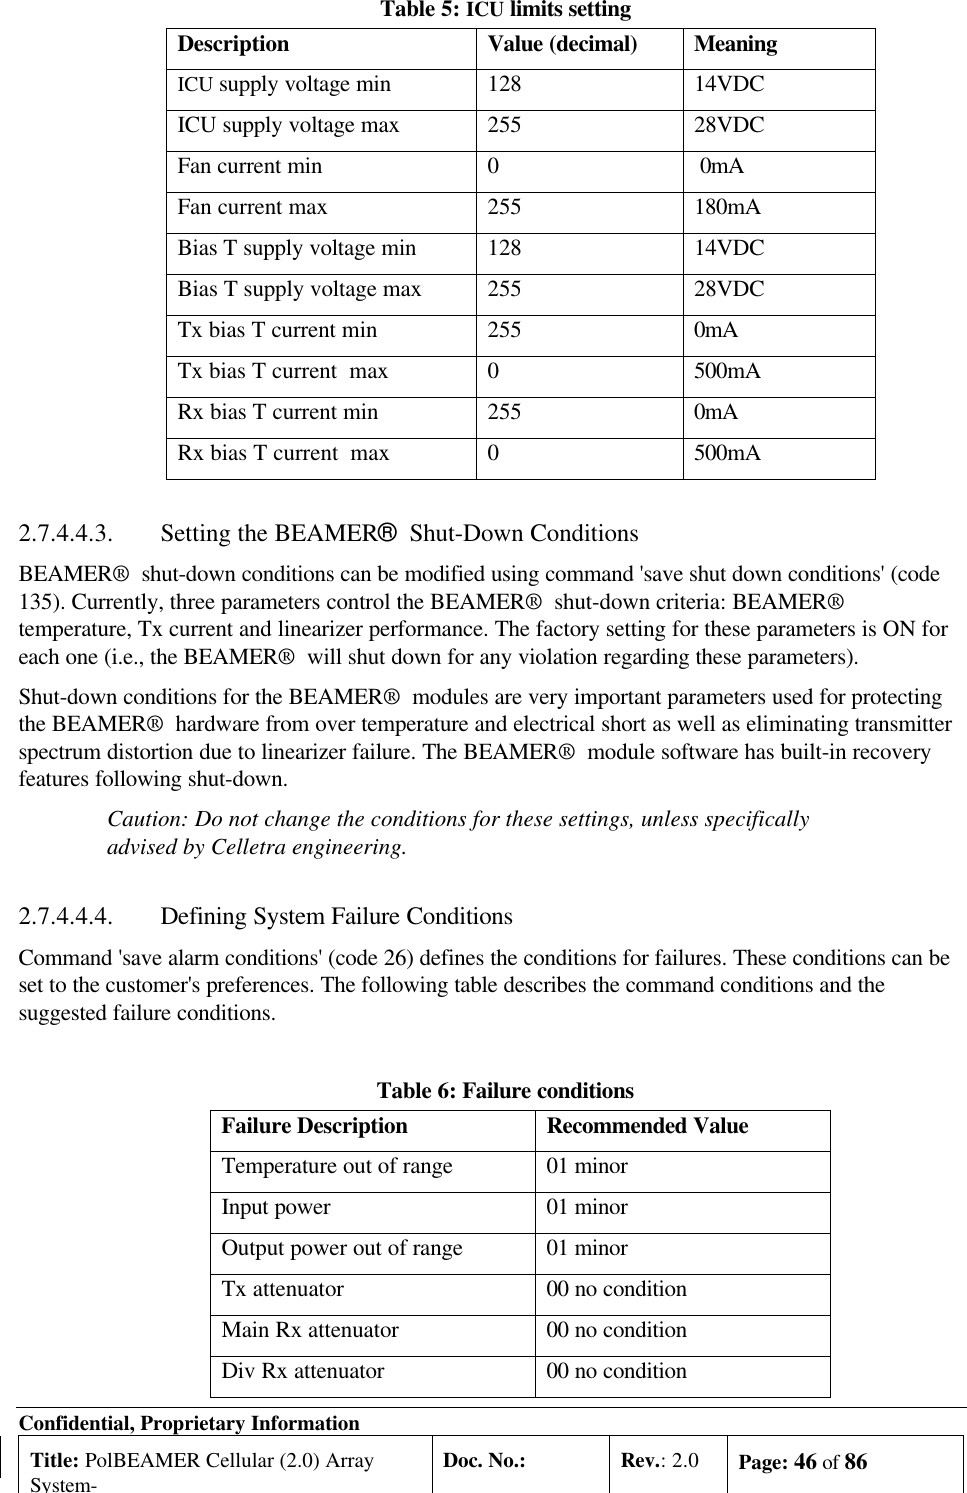 Confidential, Proprietary InformationTitle: PolBEAMER Cellular (2.0) ArraySystem-Doc. No.: Rev.: 2.0 Page: 46 of 86Table 5: ICU limits settingDescription Value (decimal) MeaningICU supply voltage min 128 14VDCICU supply voltage max 255 28VDCFan current min 0 0mAFan current max 255 180mABias T supply voltage min 128 14VDCBias T supply voltage max 255 28VDCTx bias T current min 255 0mATx bias T current  max 0500mARx bias T current min 255 0mARx bias T current  max 0500mA2.7.4.4.3. Setting the BEAMER®  Shut-Down ConditionsBEAMER®  shut-down conditions can be modified using command &apos;save shut down conditions&apos; (code135). Currently, three parameters control the BEAMER®  shut-down criteria: BEAMER®temperature, Tx current and linearizer performance. The factory setting for these parameters is ON foreach one (i.e., the BEAMER®  will shut down for any violation regarding these parameters).Shut-down conditions for the BEAMER®  modules are very important parameters used for protectingthe BEAMER®  hardware from over temperature and electrical short as well as eliminating transmitterspectrum distortion due to linearizer failure. The BEAMER®  module software has built-in recoveryfeatures following shut-down.Caution: Do not change the conditions for these settings, unless specificallyadvised by Celletra engineering.2.7.4.4.4. Defining System Failure ConditionsCommand &apos;save alarm conditions&apos; (code 26) defines the conditions for failures. These conditions can beset to the customer&apos;s preferences. The following table describes the command conditions and thesuggested failure conditions.Table 6: Failure conditionsFailure Description Recommended ValueTemperature out of range 01 minorInput power 01 minorOutput power out of range 01 minorTx attenuator 00 no conditionMain Rx attenuator 00 no conditionDiv Rx attenuator 00 no condition